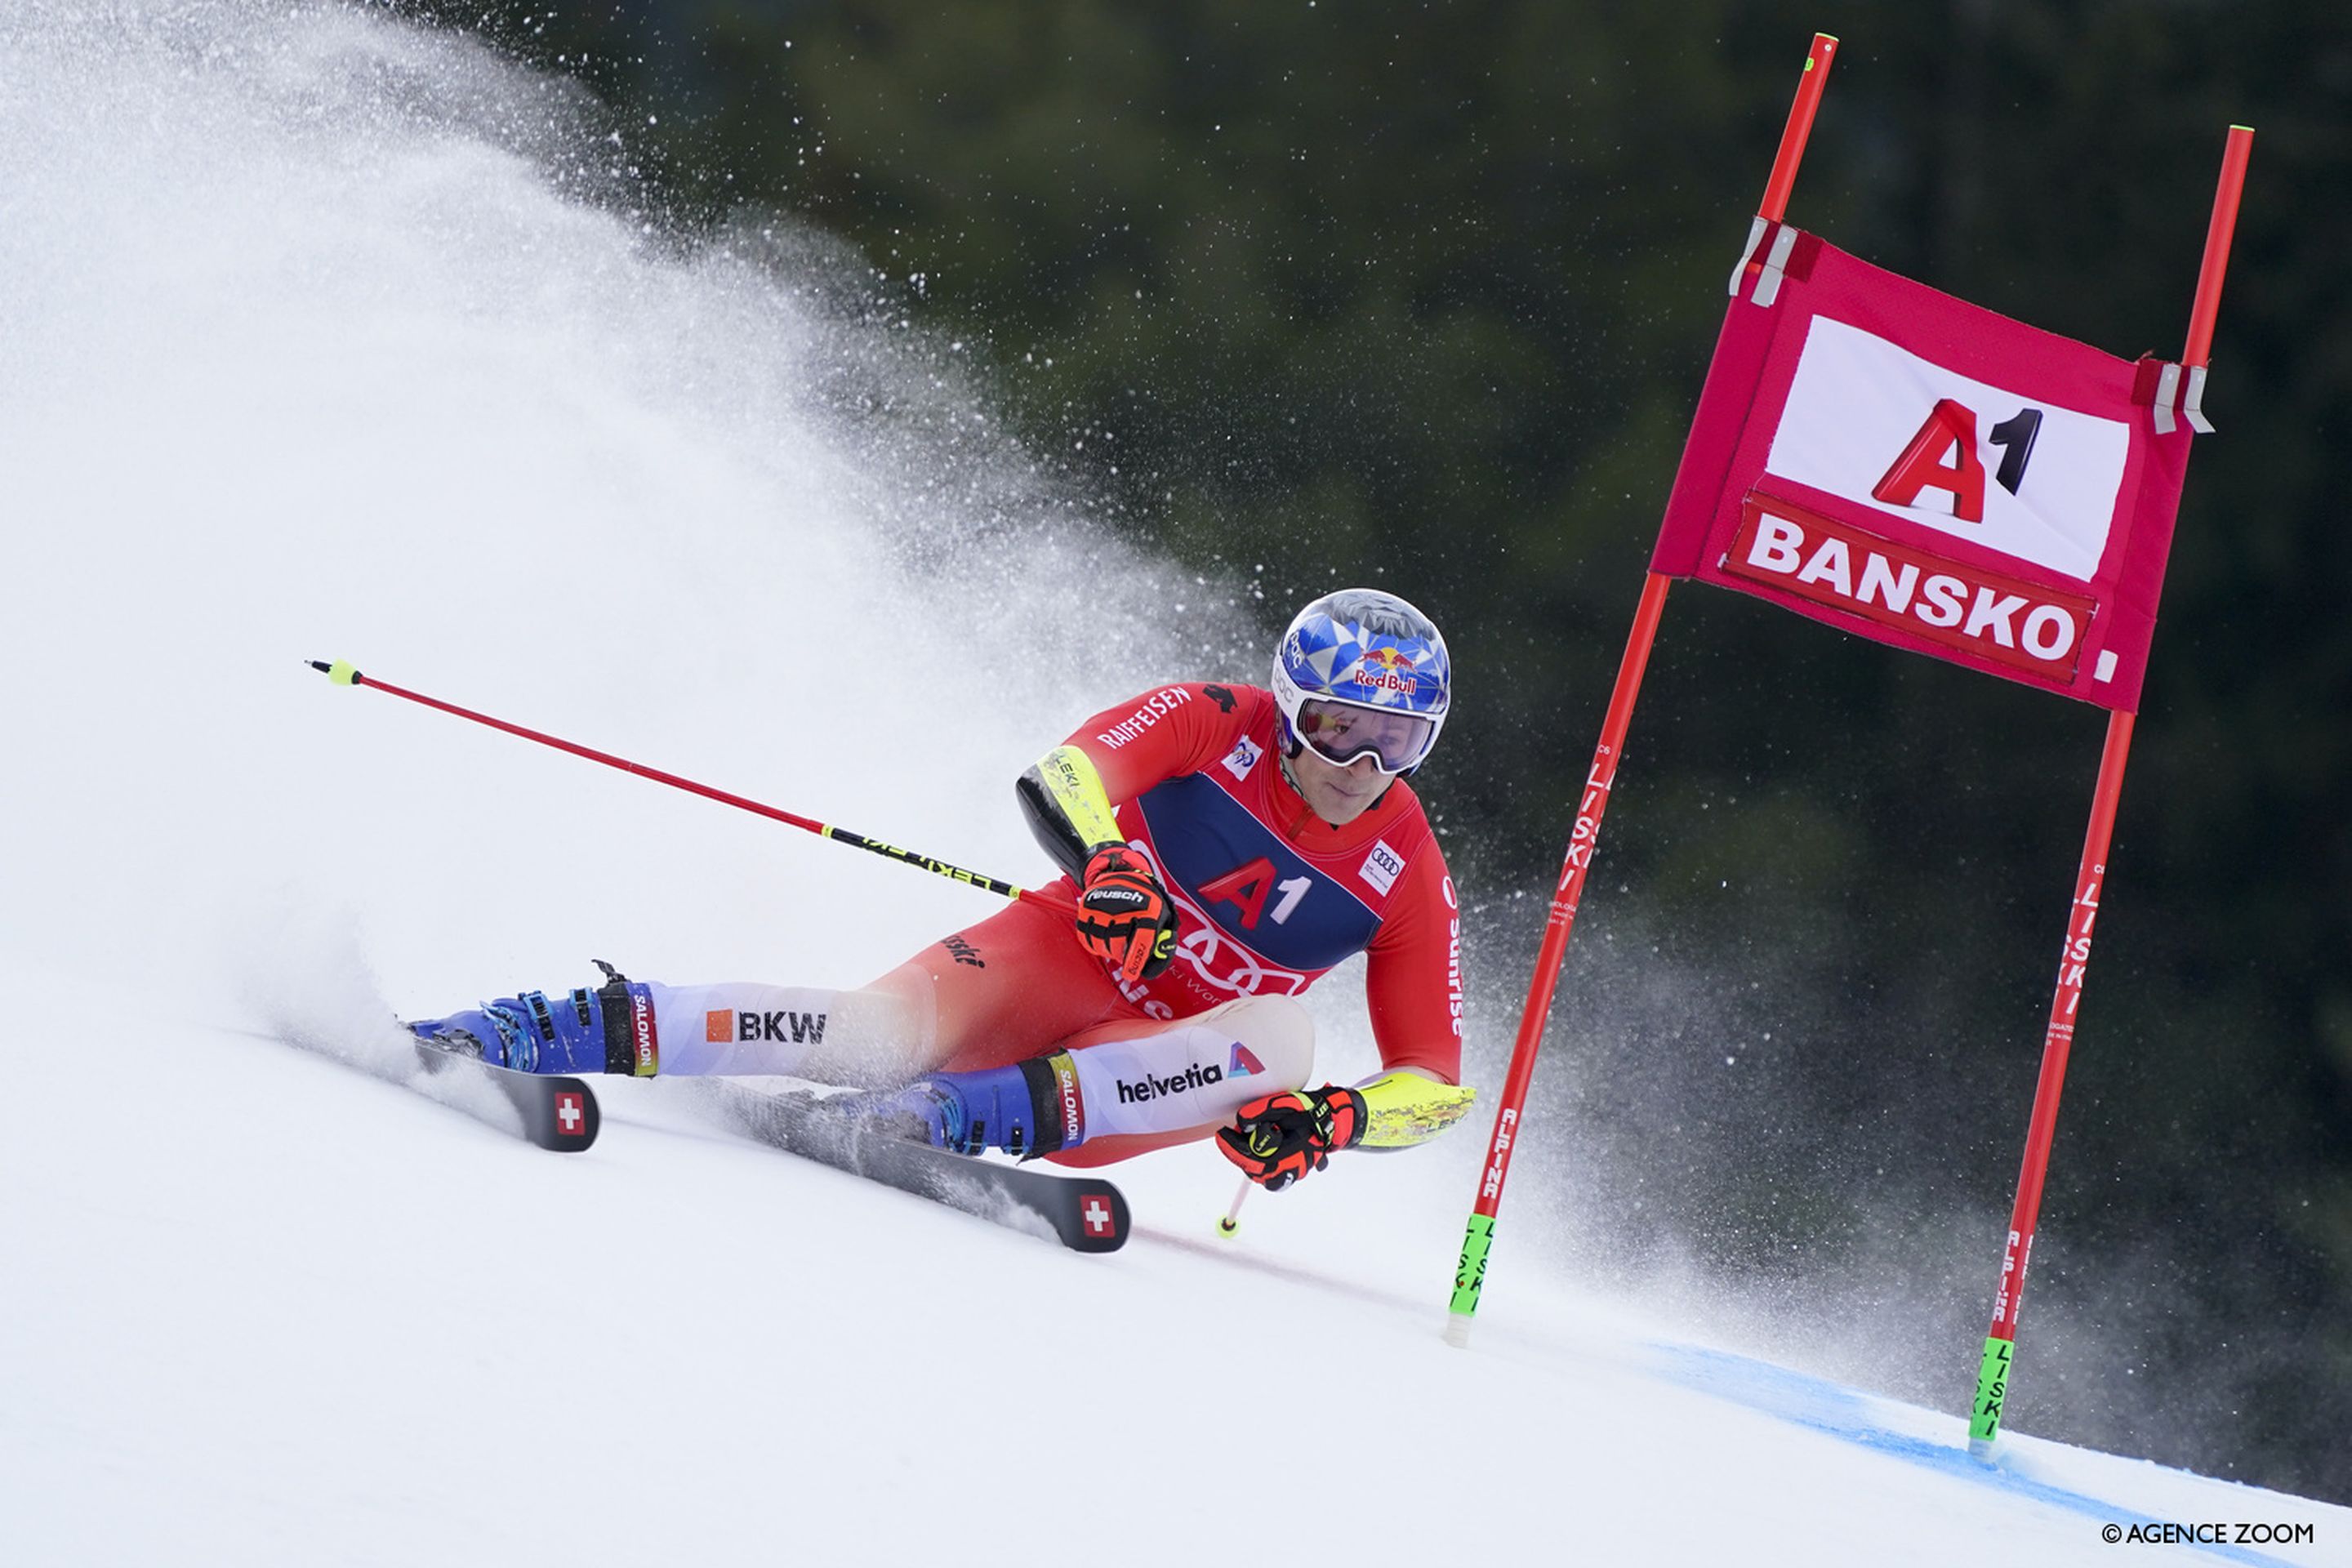 Odermatt charges down the Banderitza piste en route to victory in Bansko (Agence Zoom)